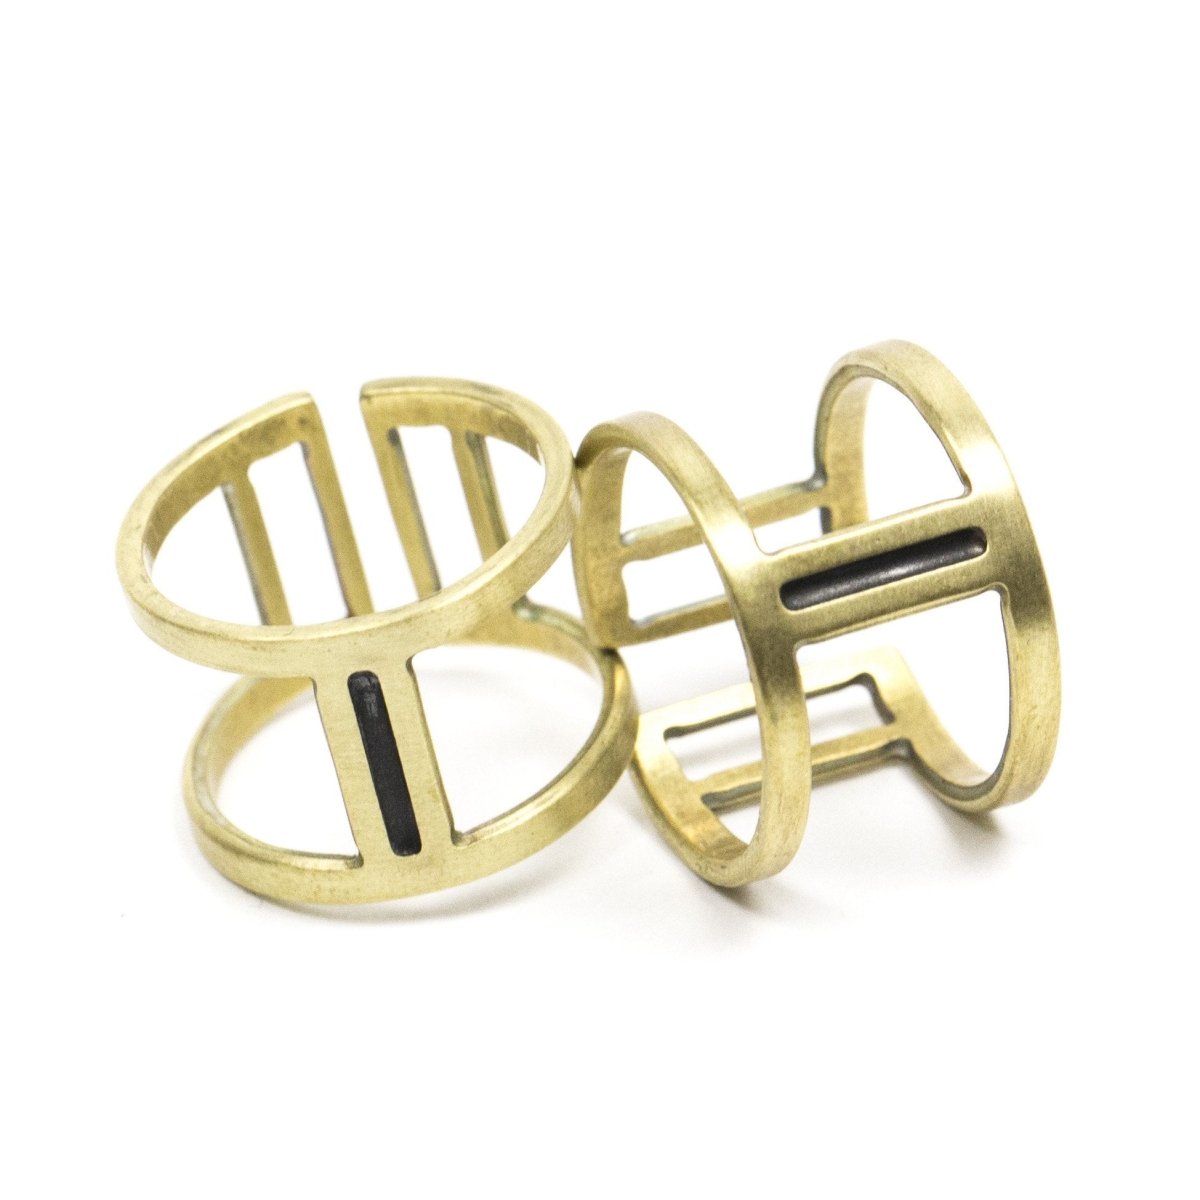 Two wide, adjustable brass rings with large, rectangular cutouts surrounding a slim, oxidized center piece. Hand-crafted in Portland, Oregon. 